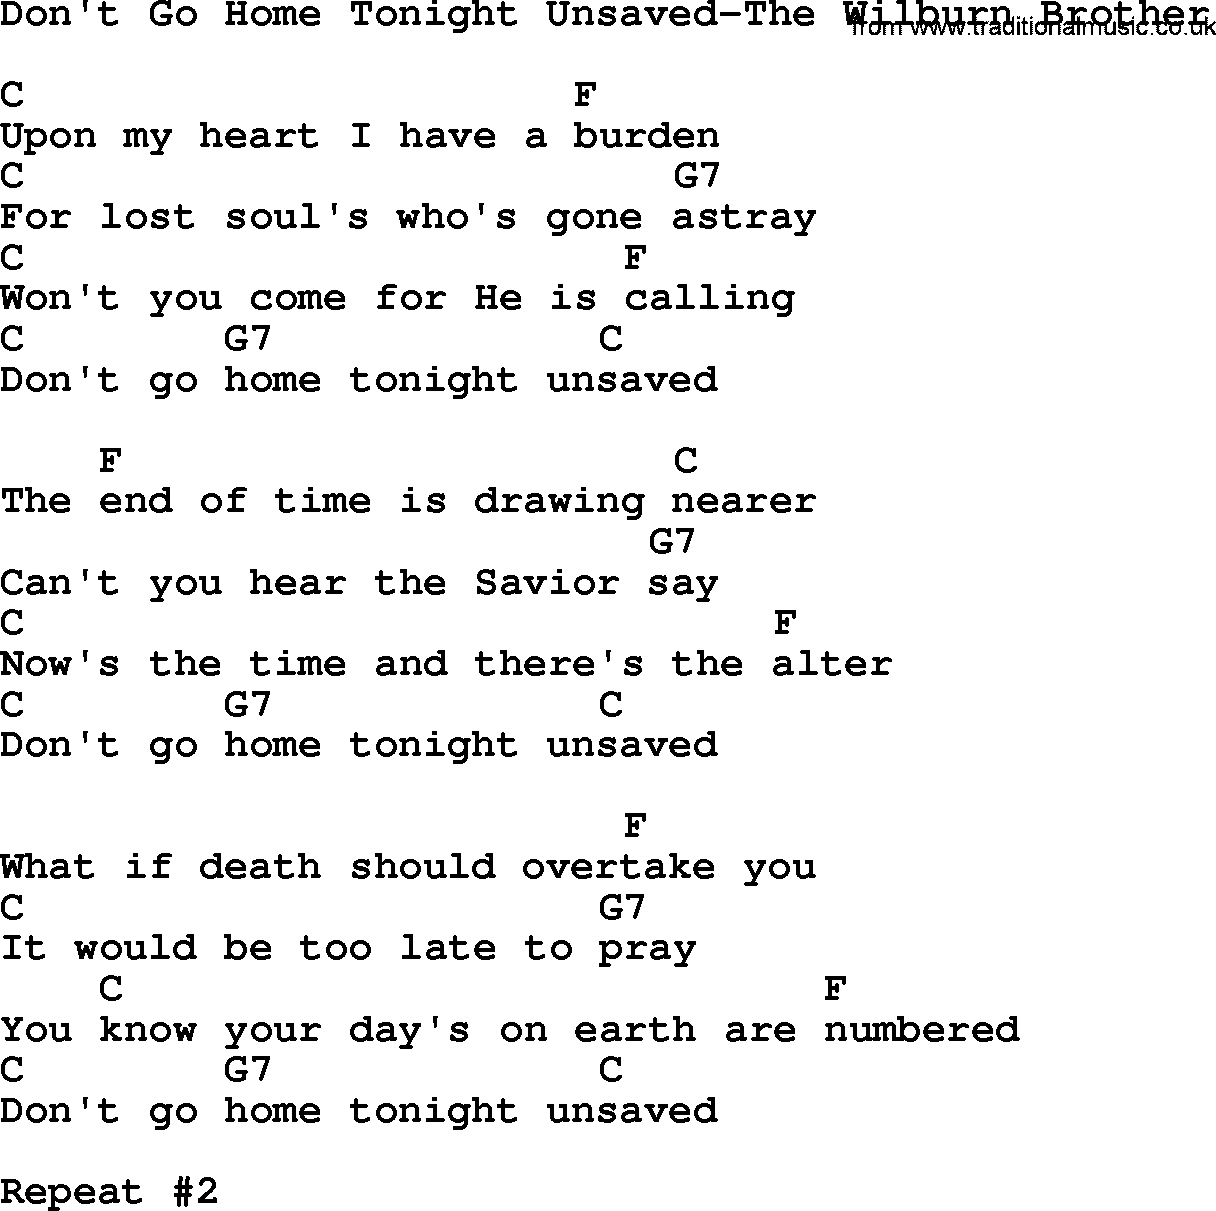 Country music song: Don't Go Home Tonight Unsaved-The Wilburn Brother lyrics and chords